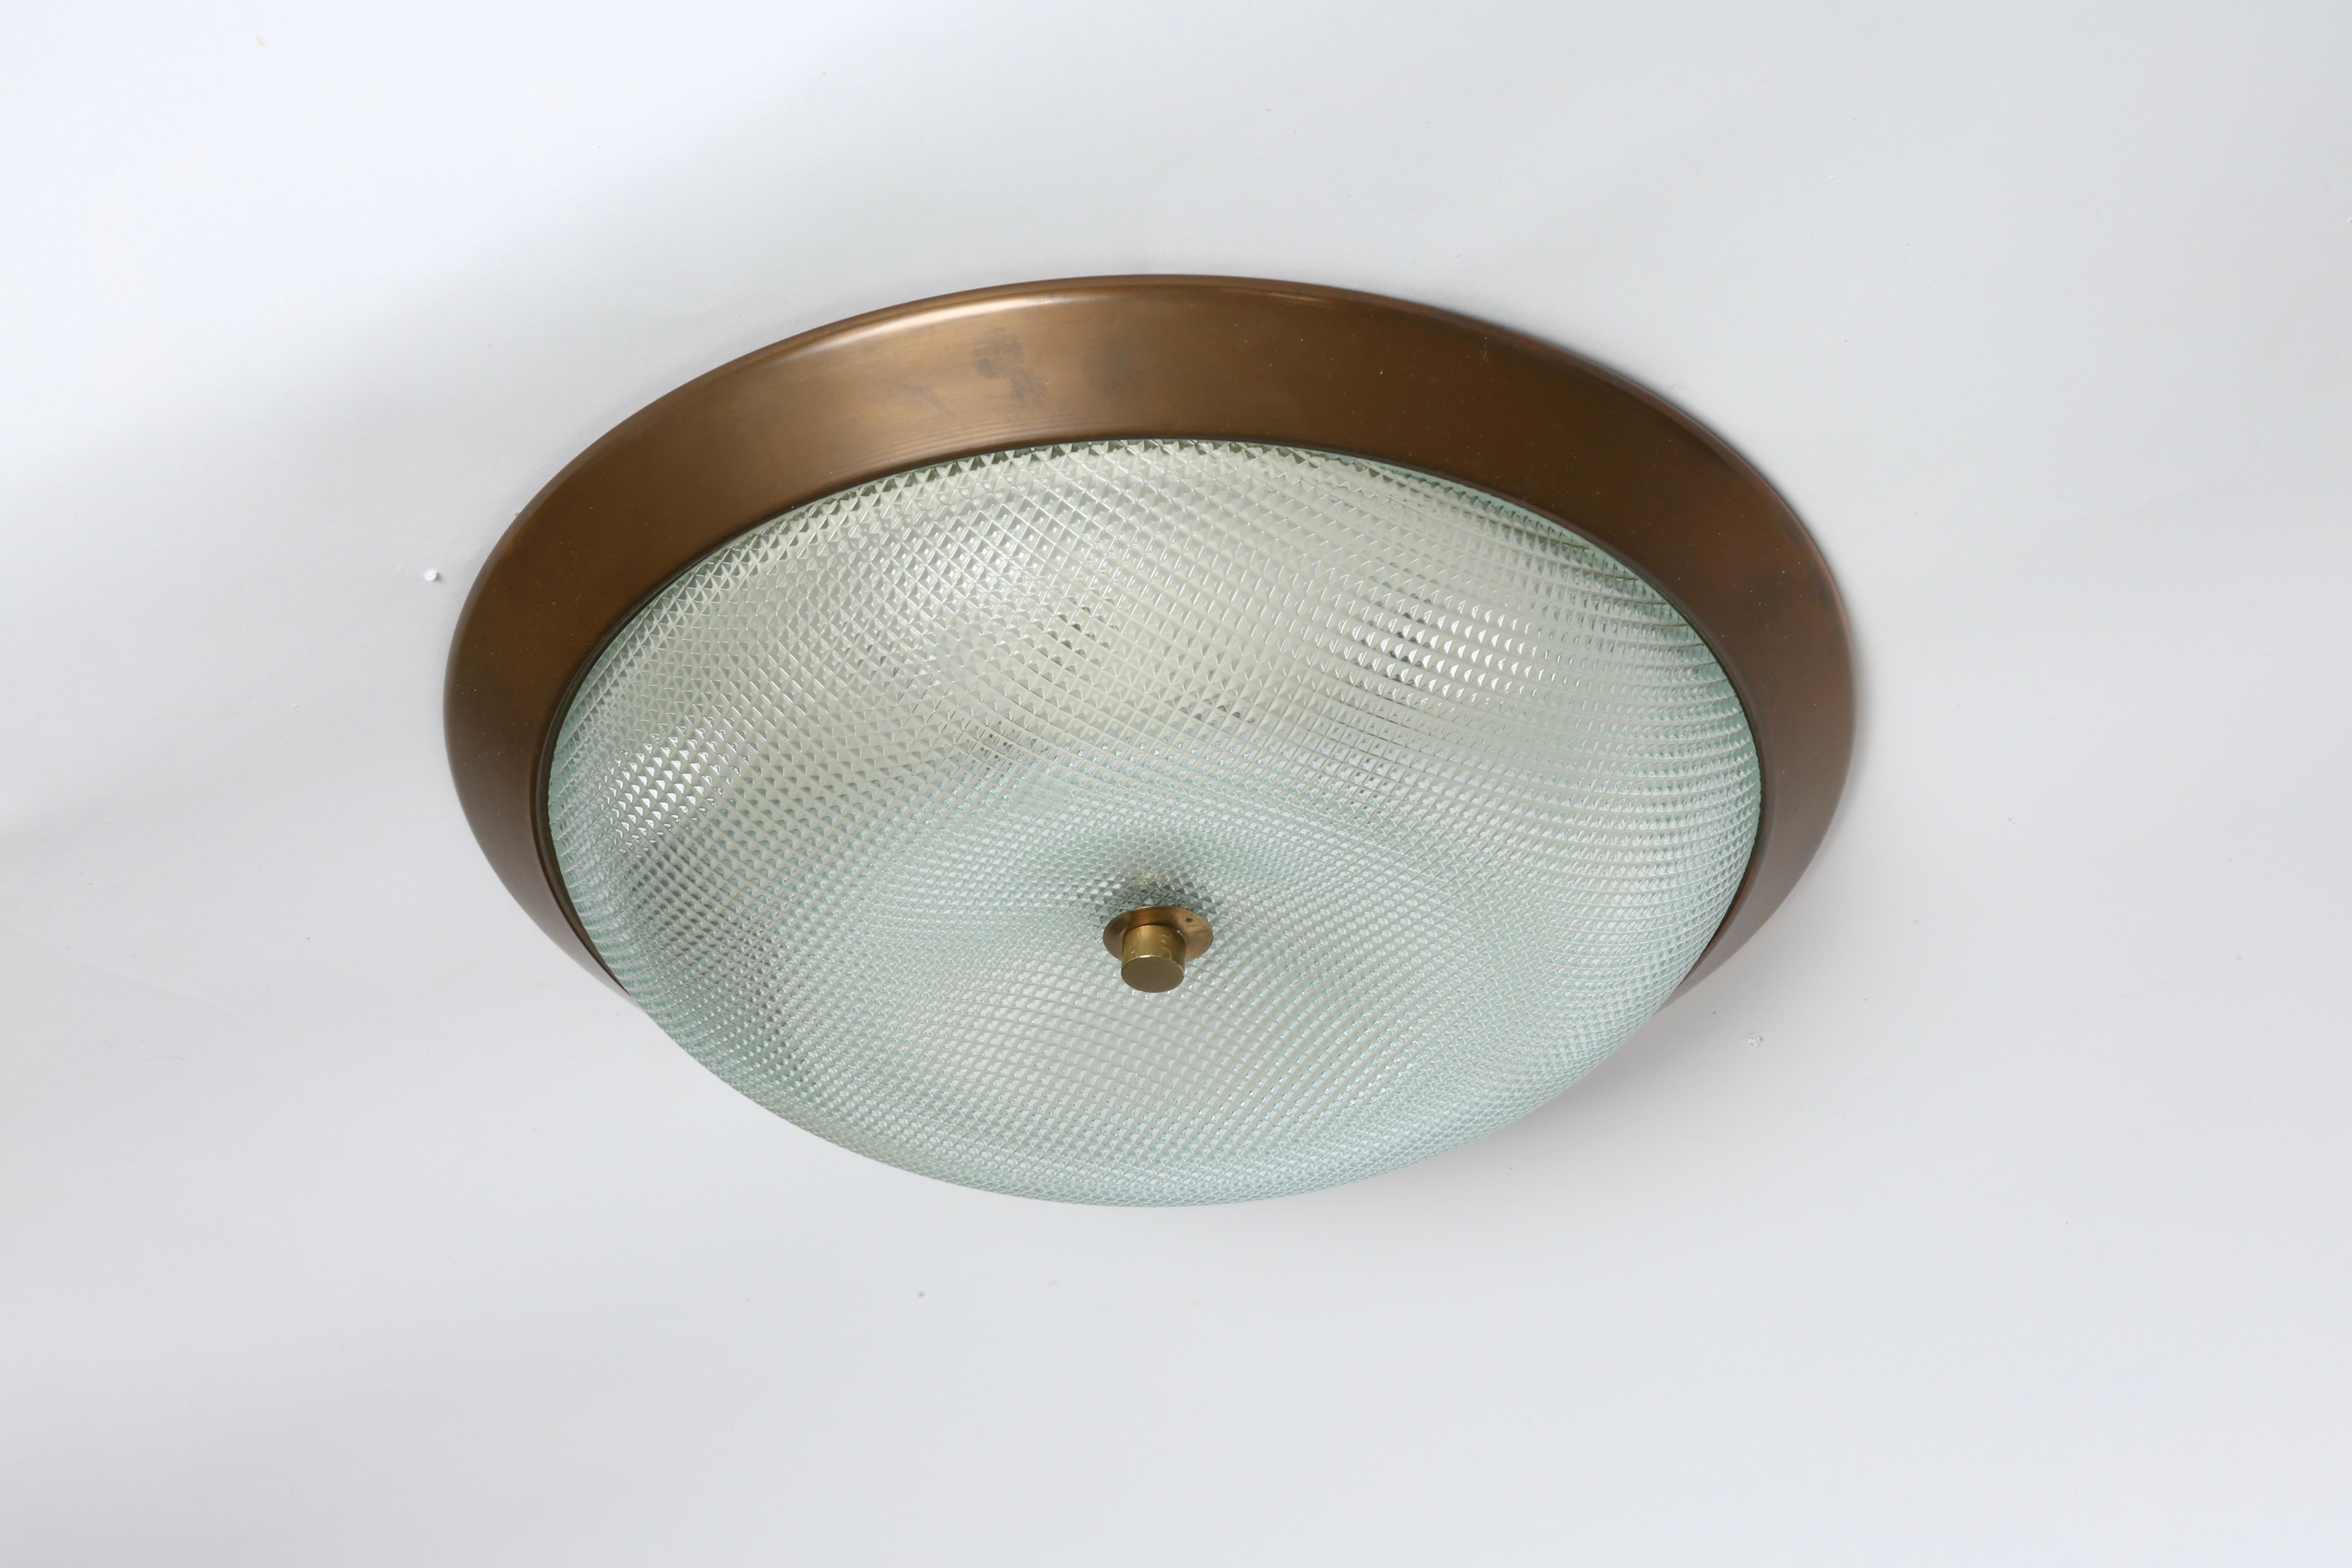 Flush mount ceiling light.
Designed and made in Italy in 1960s
Textured glass, patinated brass.
Takes 3 candelabra bulbs.
Complimentary US rewiring upon request.

